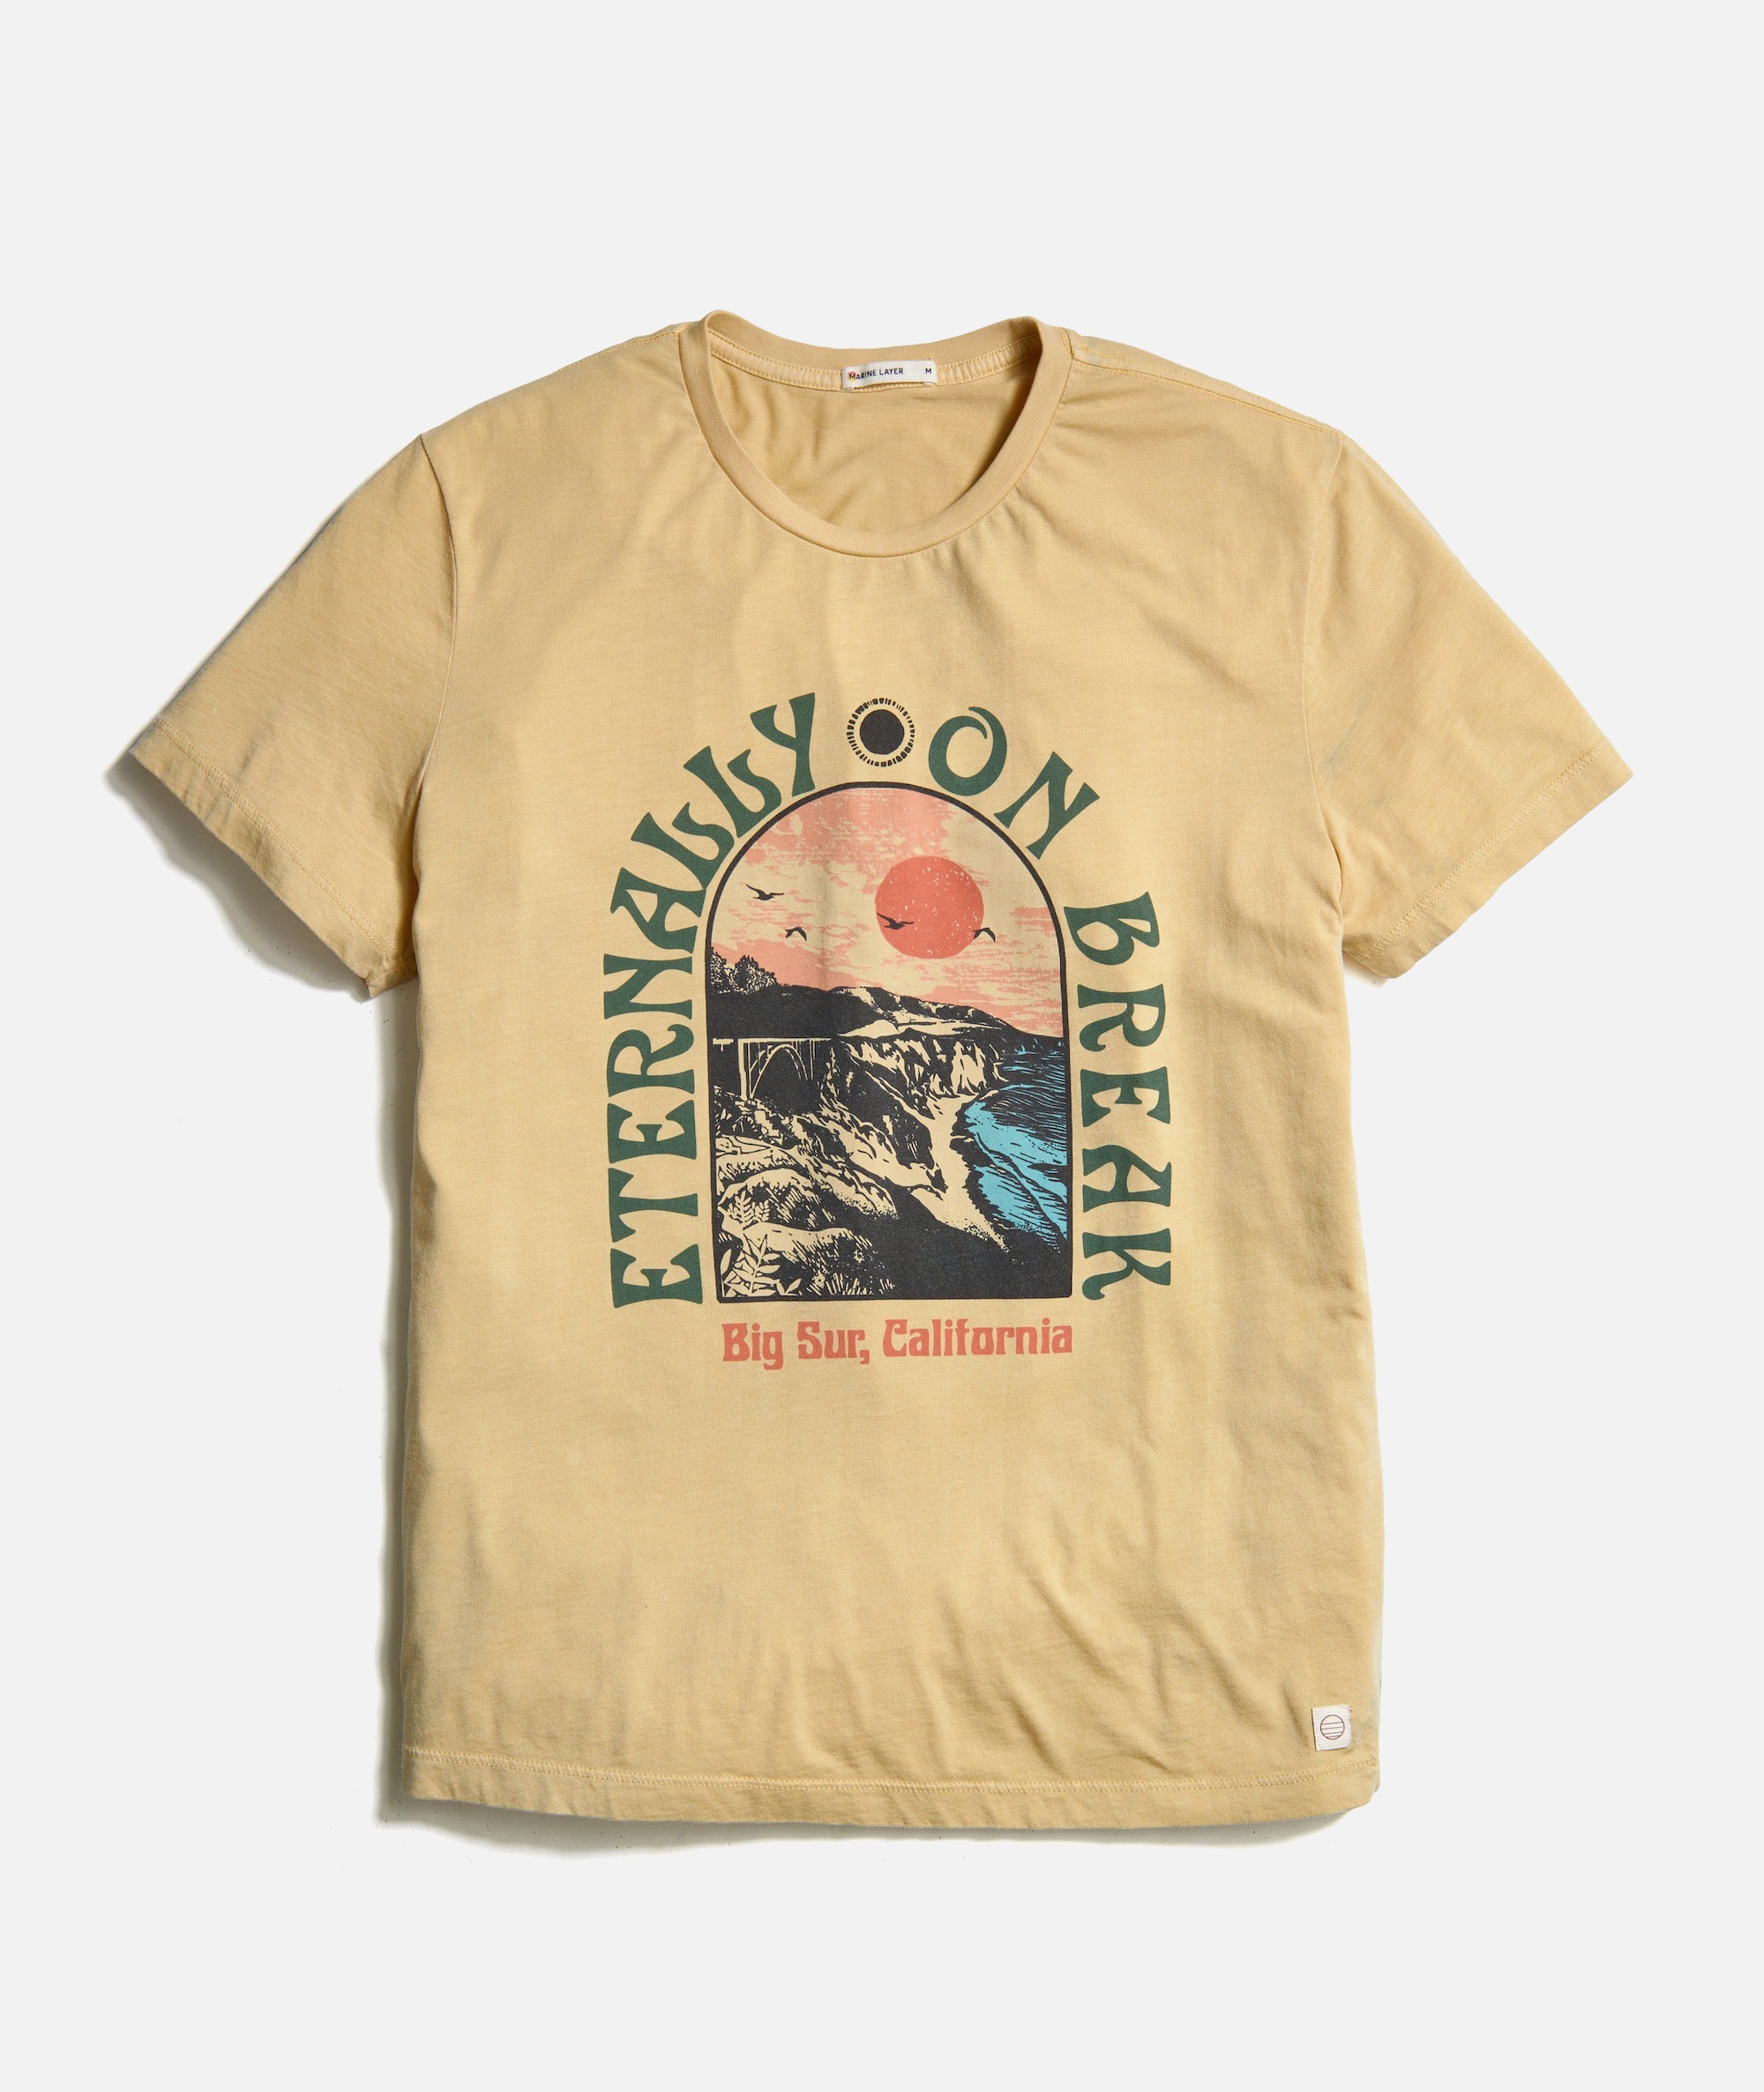 Relaxed Hemp Cotton Pocket Tee in Sand